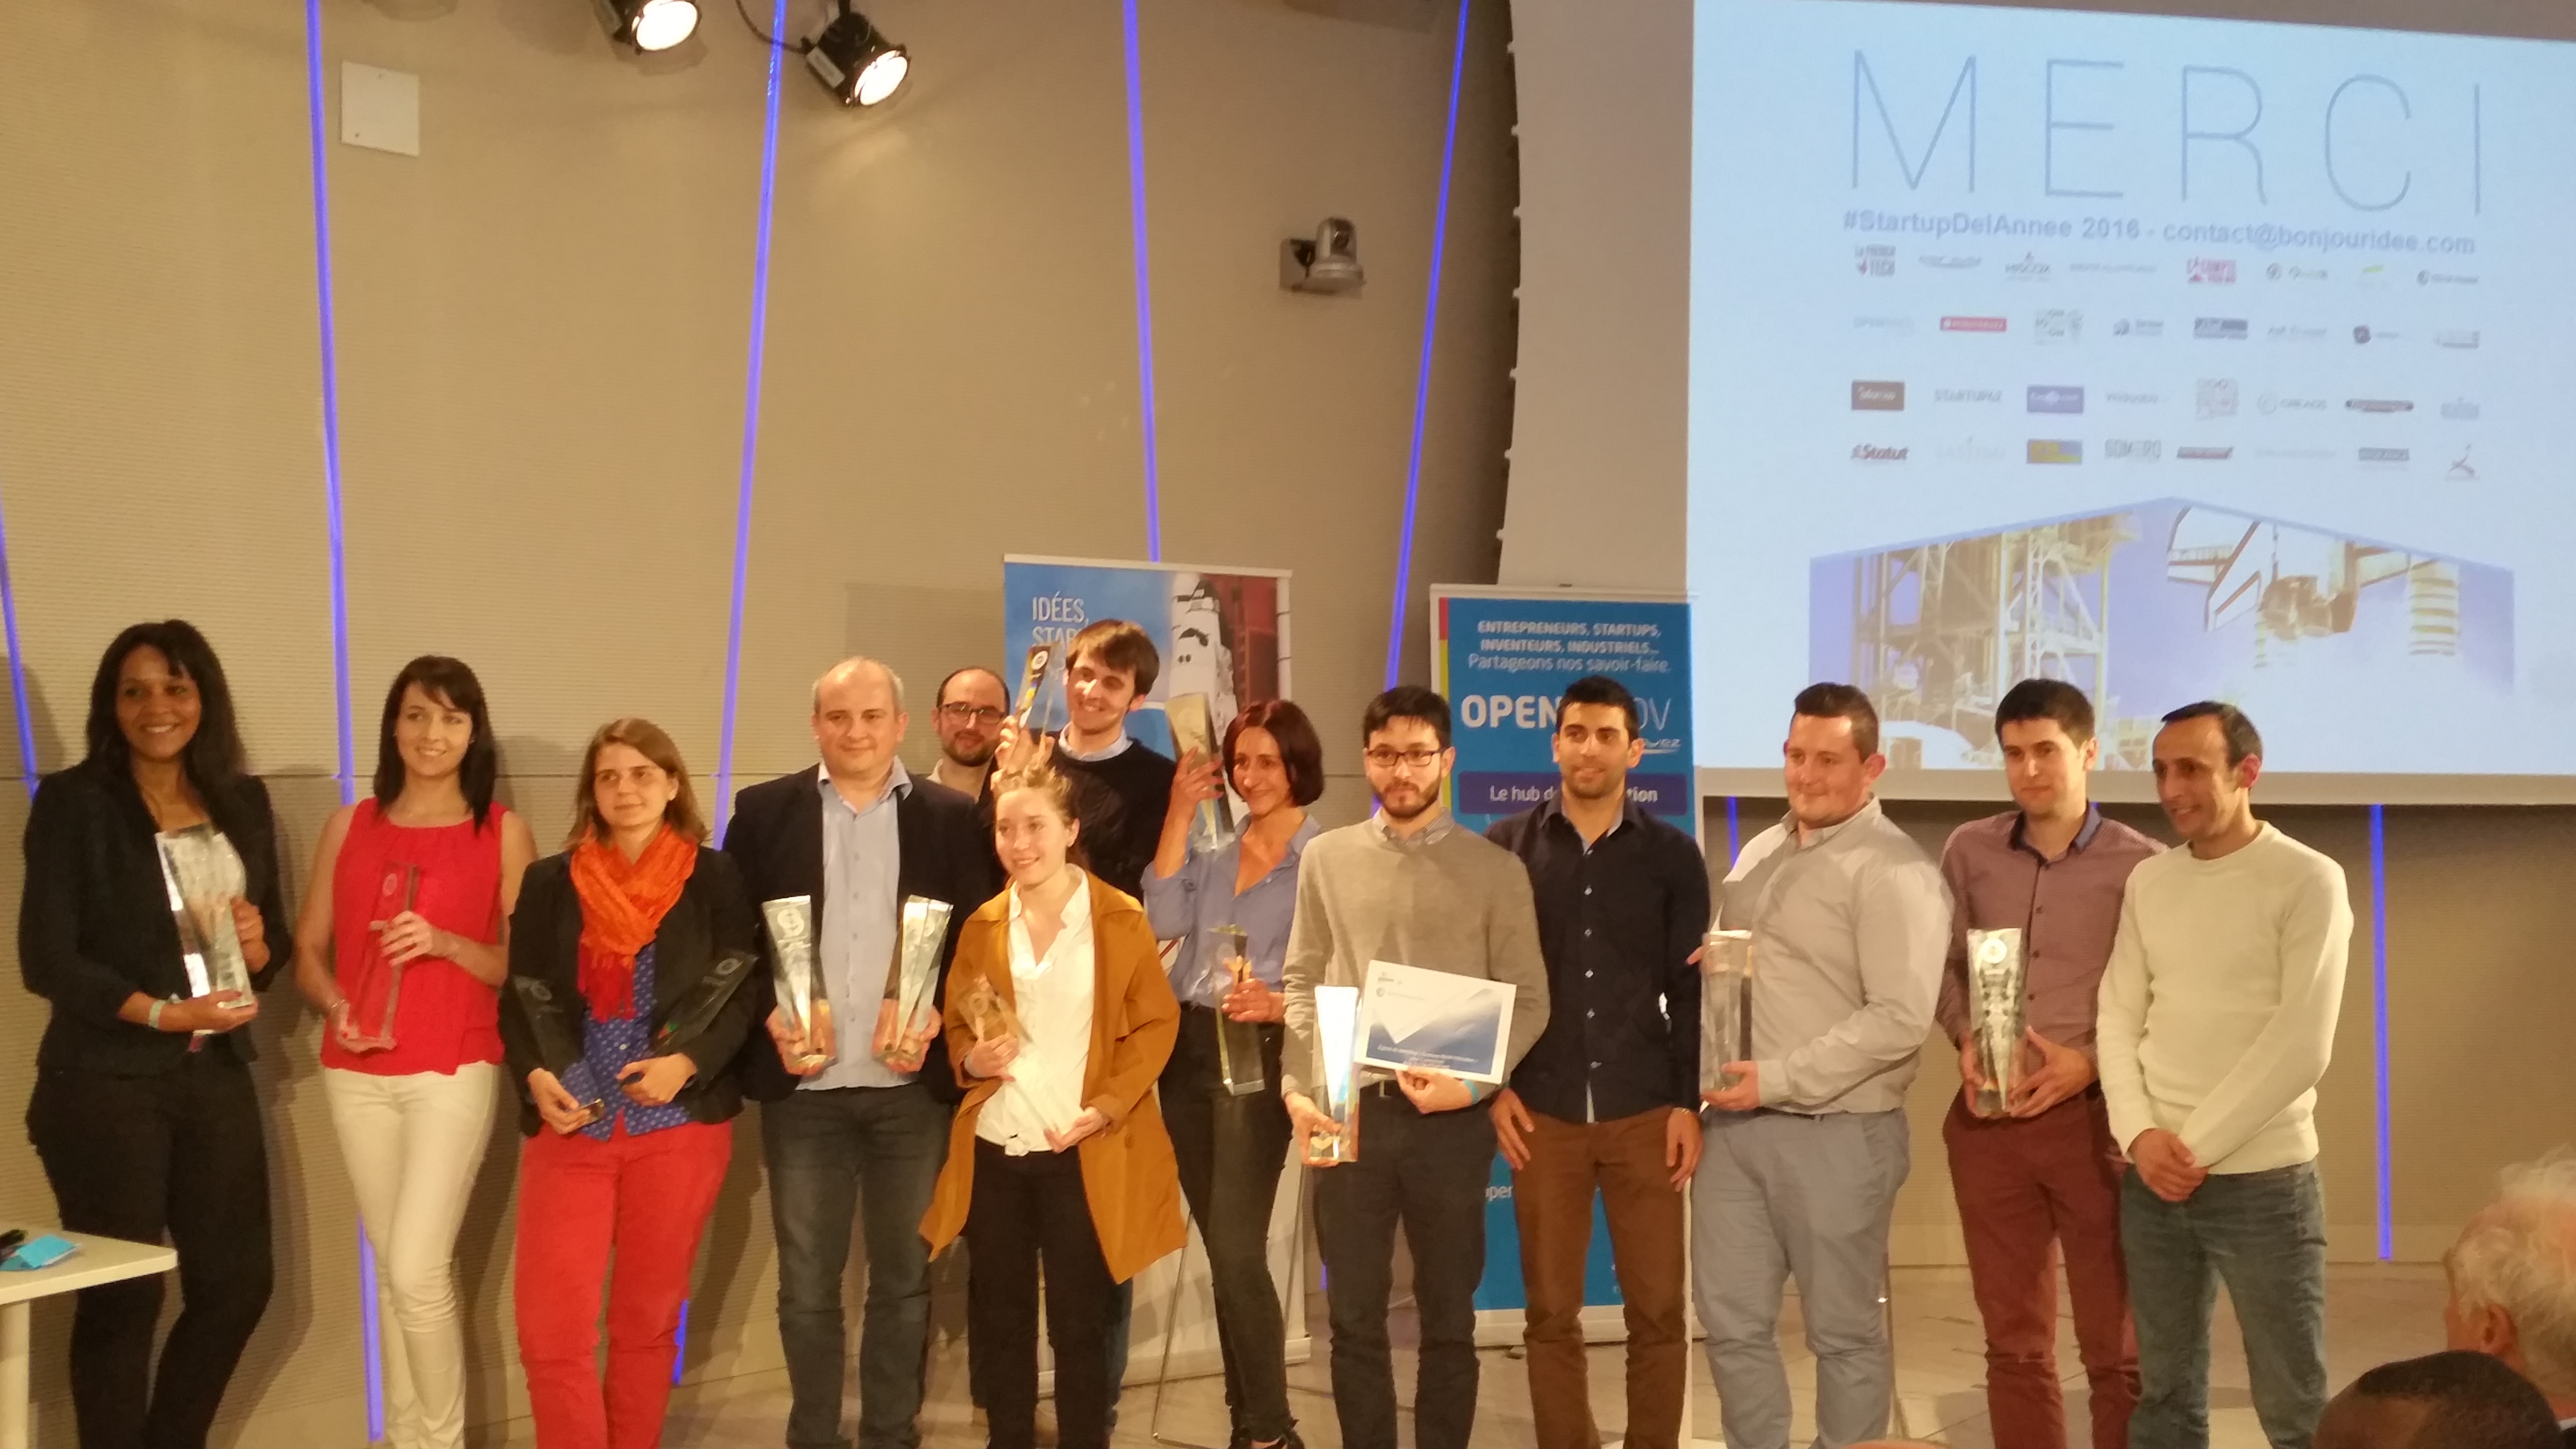 Bonjour Idée’s Startup of the Year 2015 Awards Ceremony at GDF SUEZ